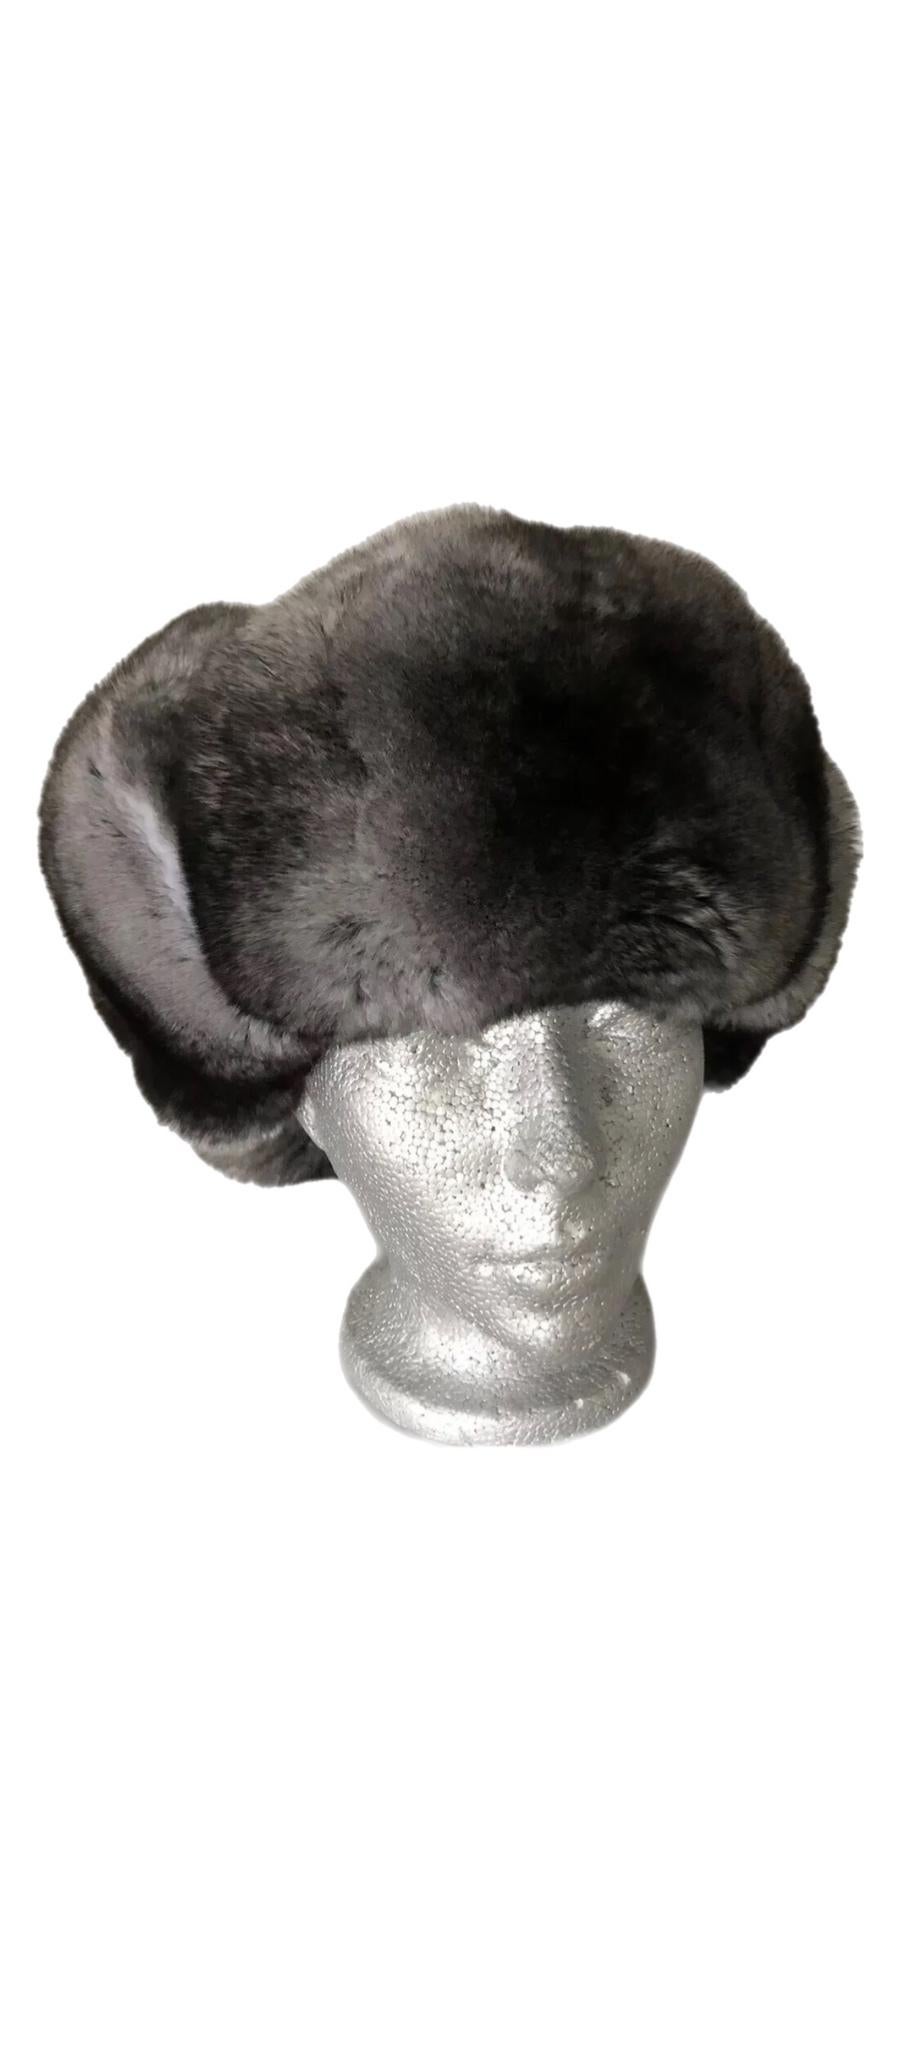 Brand New Chinchilla Fur hat (Size - M)

Made in Canada 

Note: This hat was made with the best quality European chinchilla pelts which are extremely lightweight. They have the highest hair density, a remarkable hair volume and  natural shades of